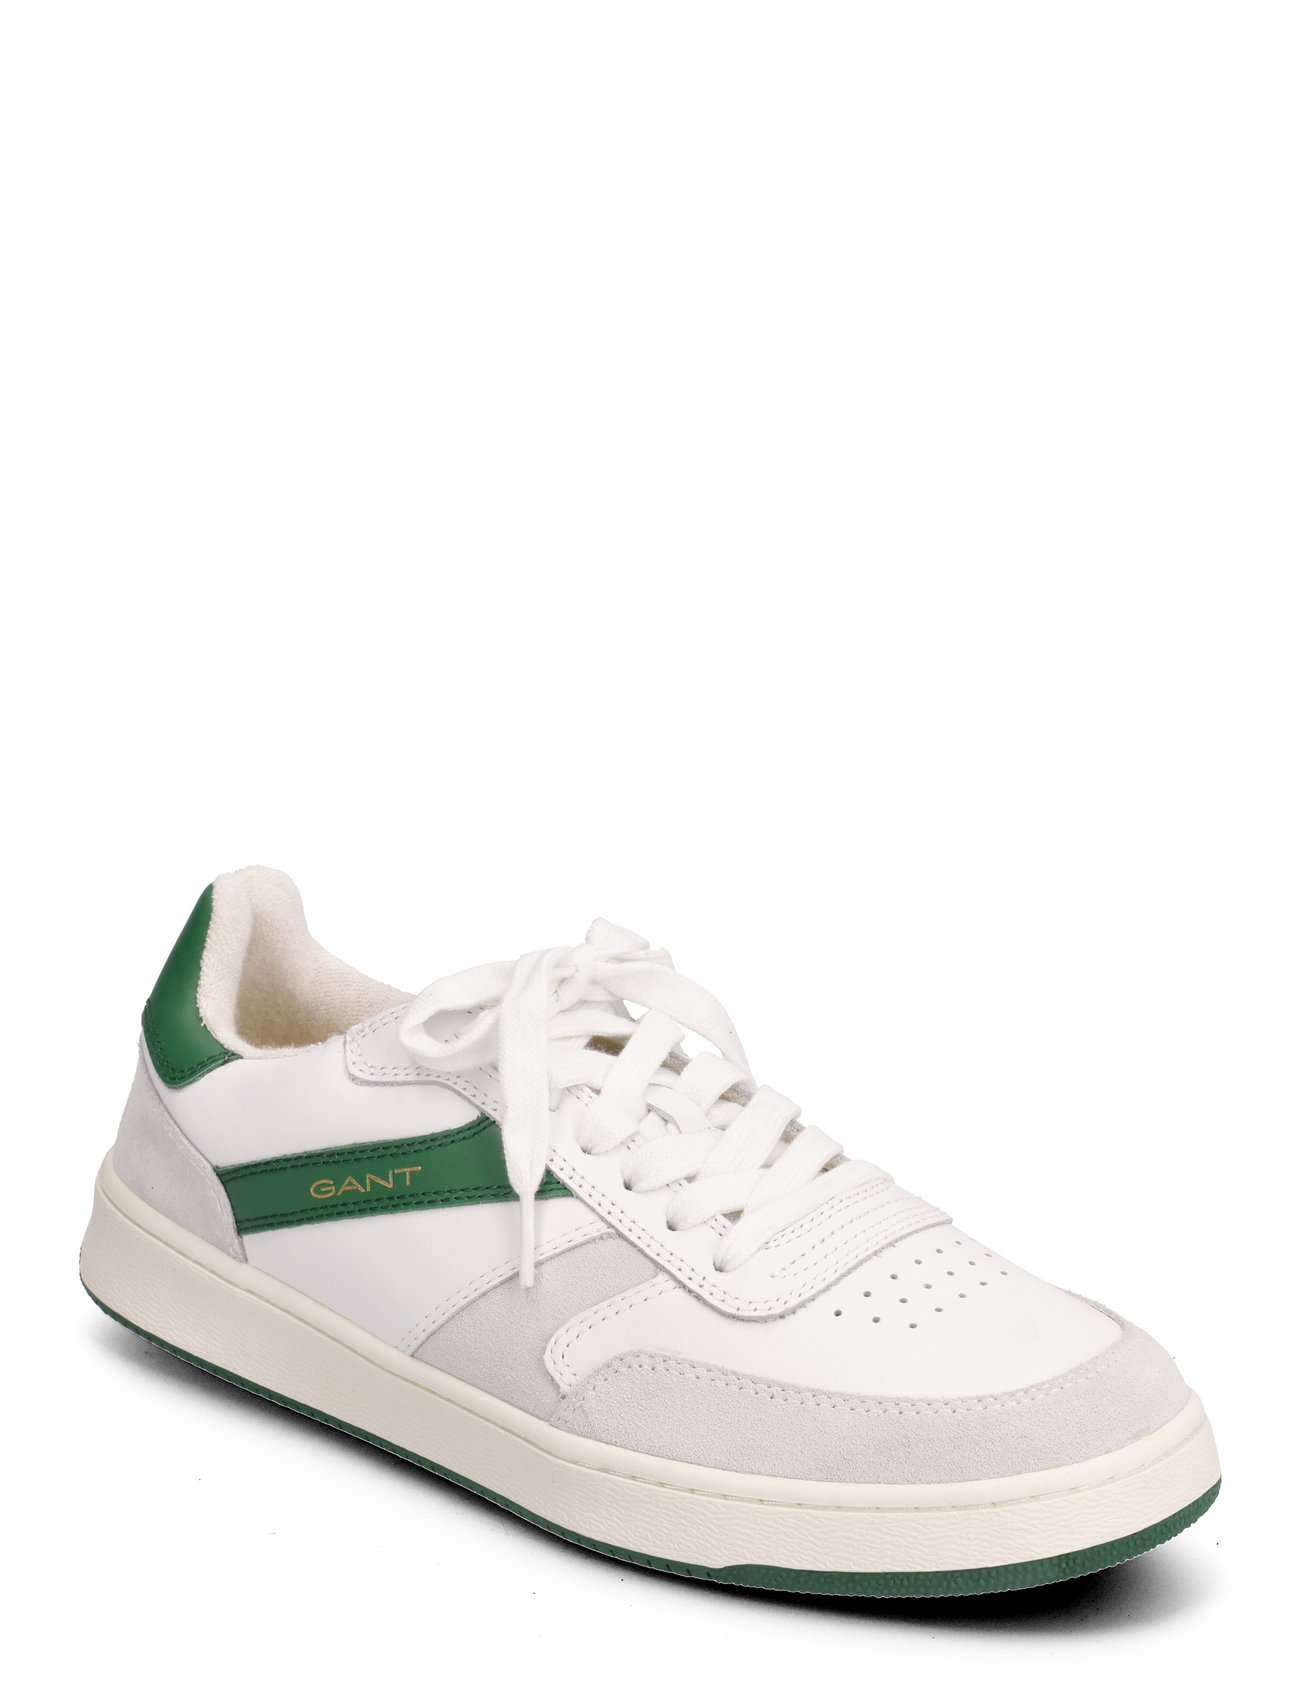 GANT Goodpal - Lave sneakers Boozt.com